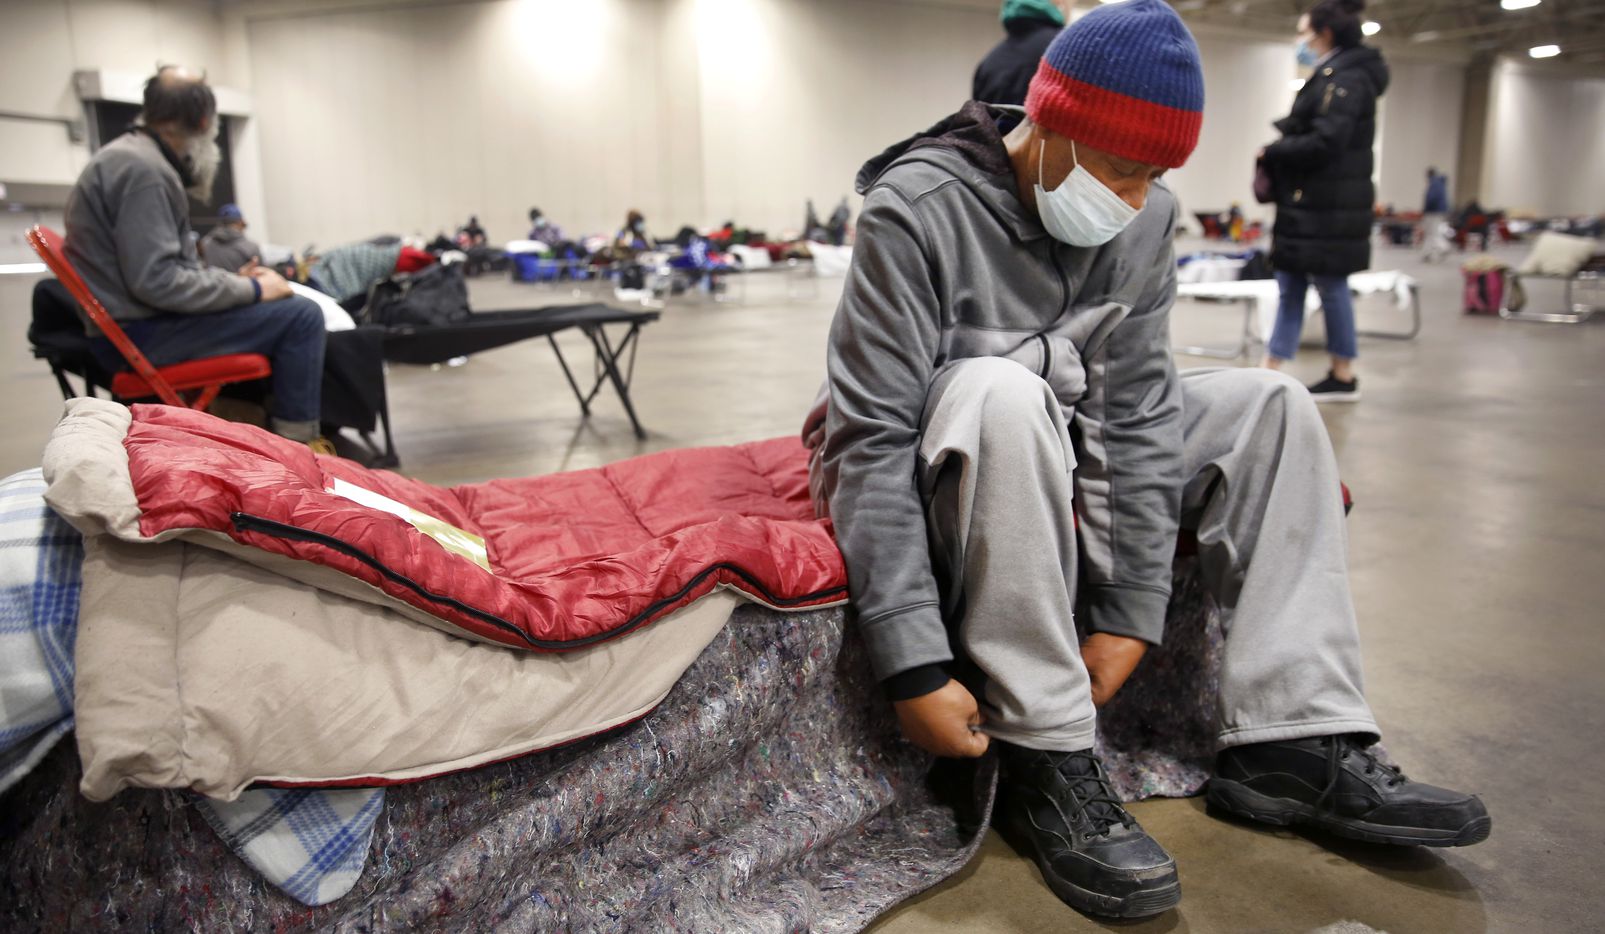 Pierre Scott, a 59 year-old guest and volunteer at a warming center run by OurCalling, changed socks on his socially-distanced cot at the Kay Bailey Hutchison Convention Center in Dallas, Tuesday, February 16, 2021. Scott like a lot of other folks, found refuge from the overnight sub-zero temperatures. (Tom Fox/The Dallas Morning News)